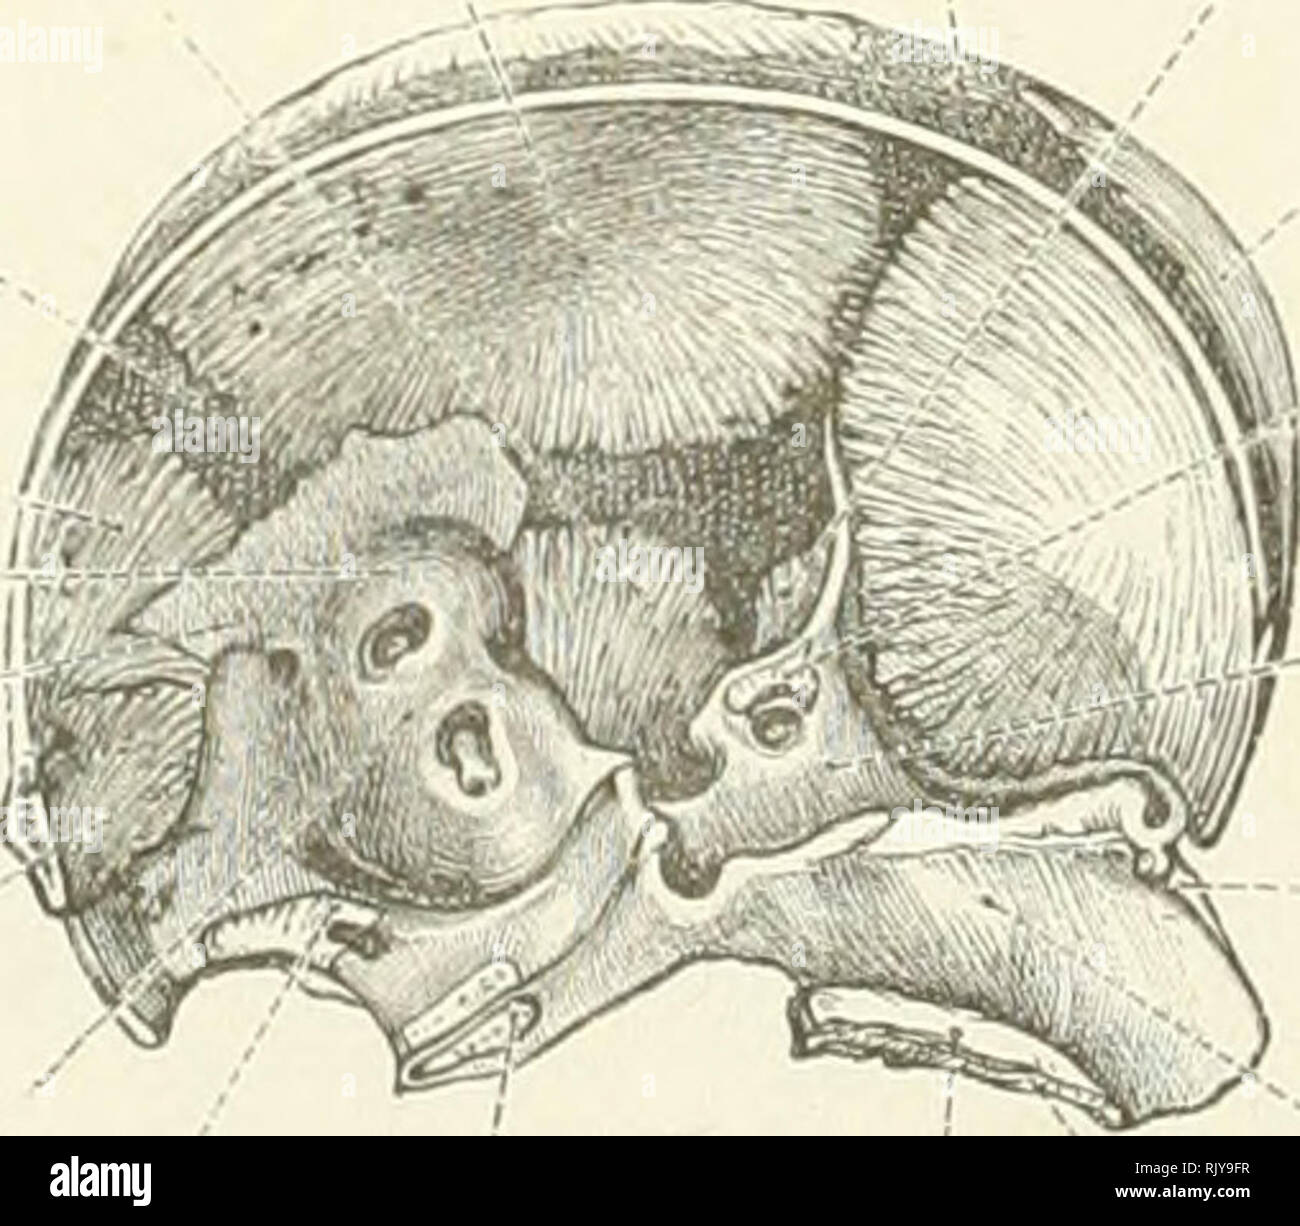 . An atlas of human anatomy for students and physicians. Anatomy. j Umbilical vesicle Vesicula umbilicalis Fig. 223.—Human Embryo, Four Weeks old. The umbilical vesicle has been opened. Parietal bone Os parietale Squamous portion of the temporal bone Squama temporalis Membranous portion of the primordial cranium Pars membranacea cranii primordialis intermembranous part of the supra-occipital portion of the occipital bone1 Pars intermembranacea squamae occipitalis 1 erlor semicircular canal—Canals -.emicircularis superior Cartilaginous portion of the primordial cranium Pars cartilaginea cranii  Stock Photo